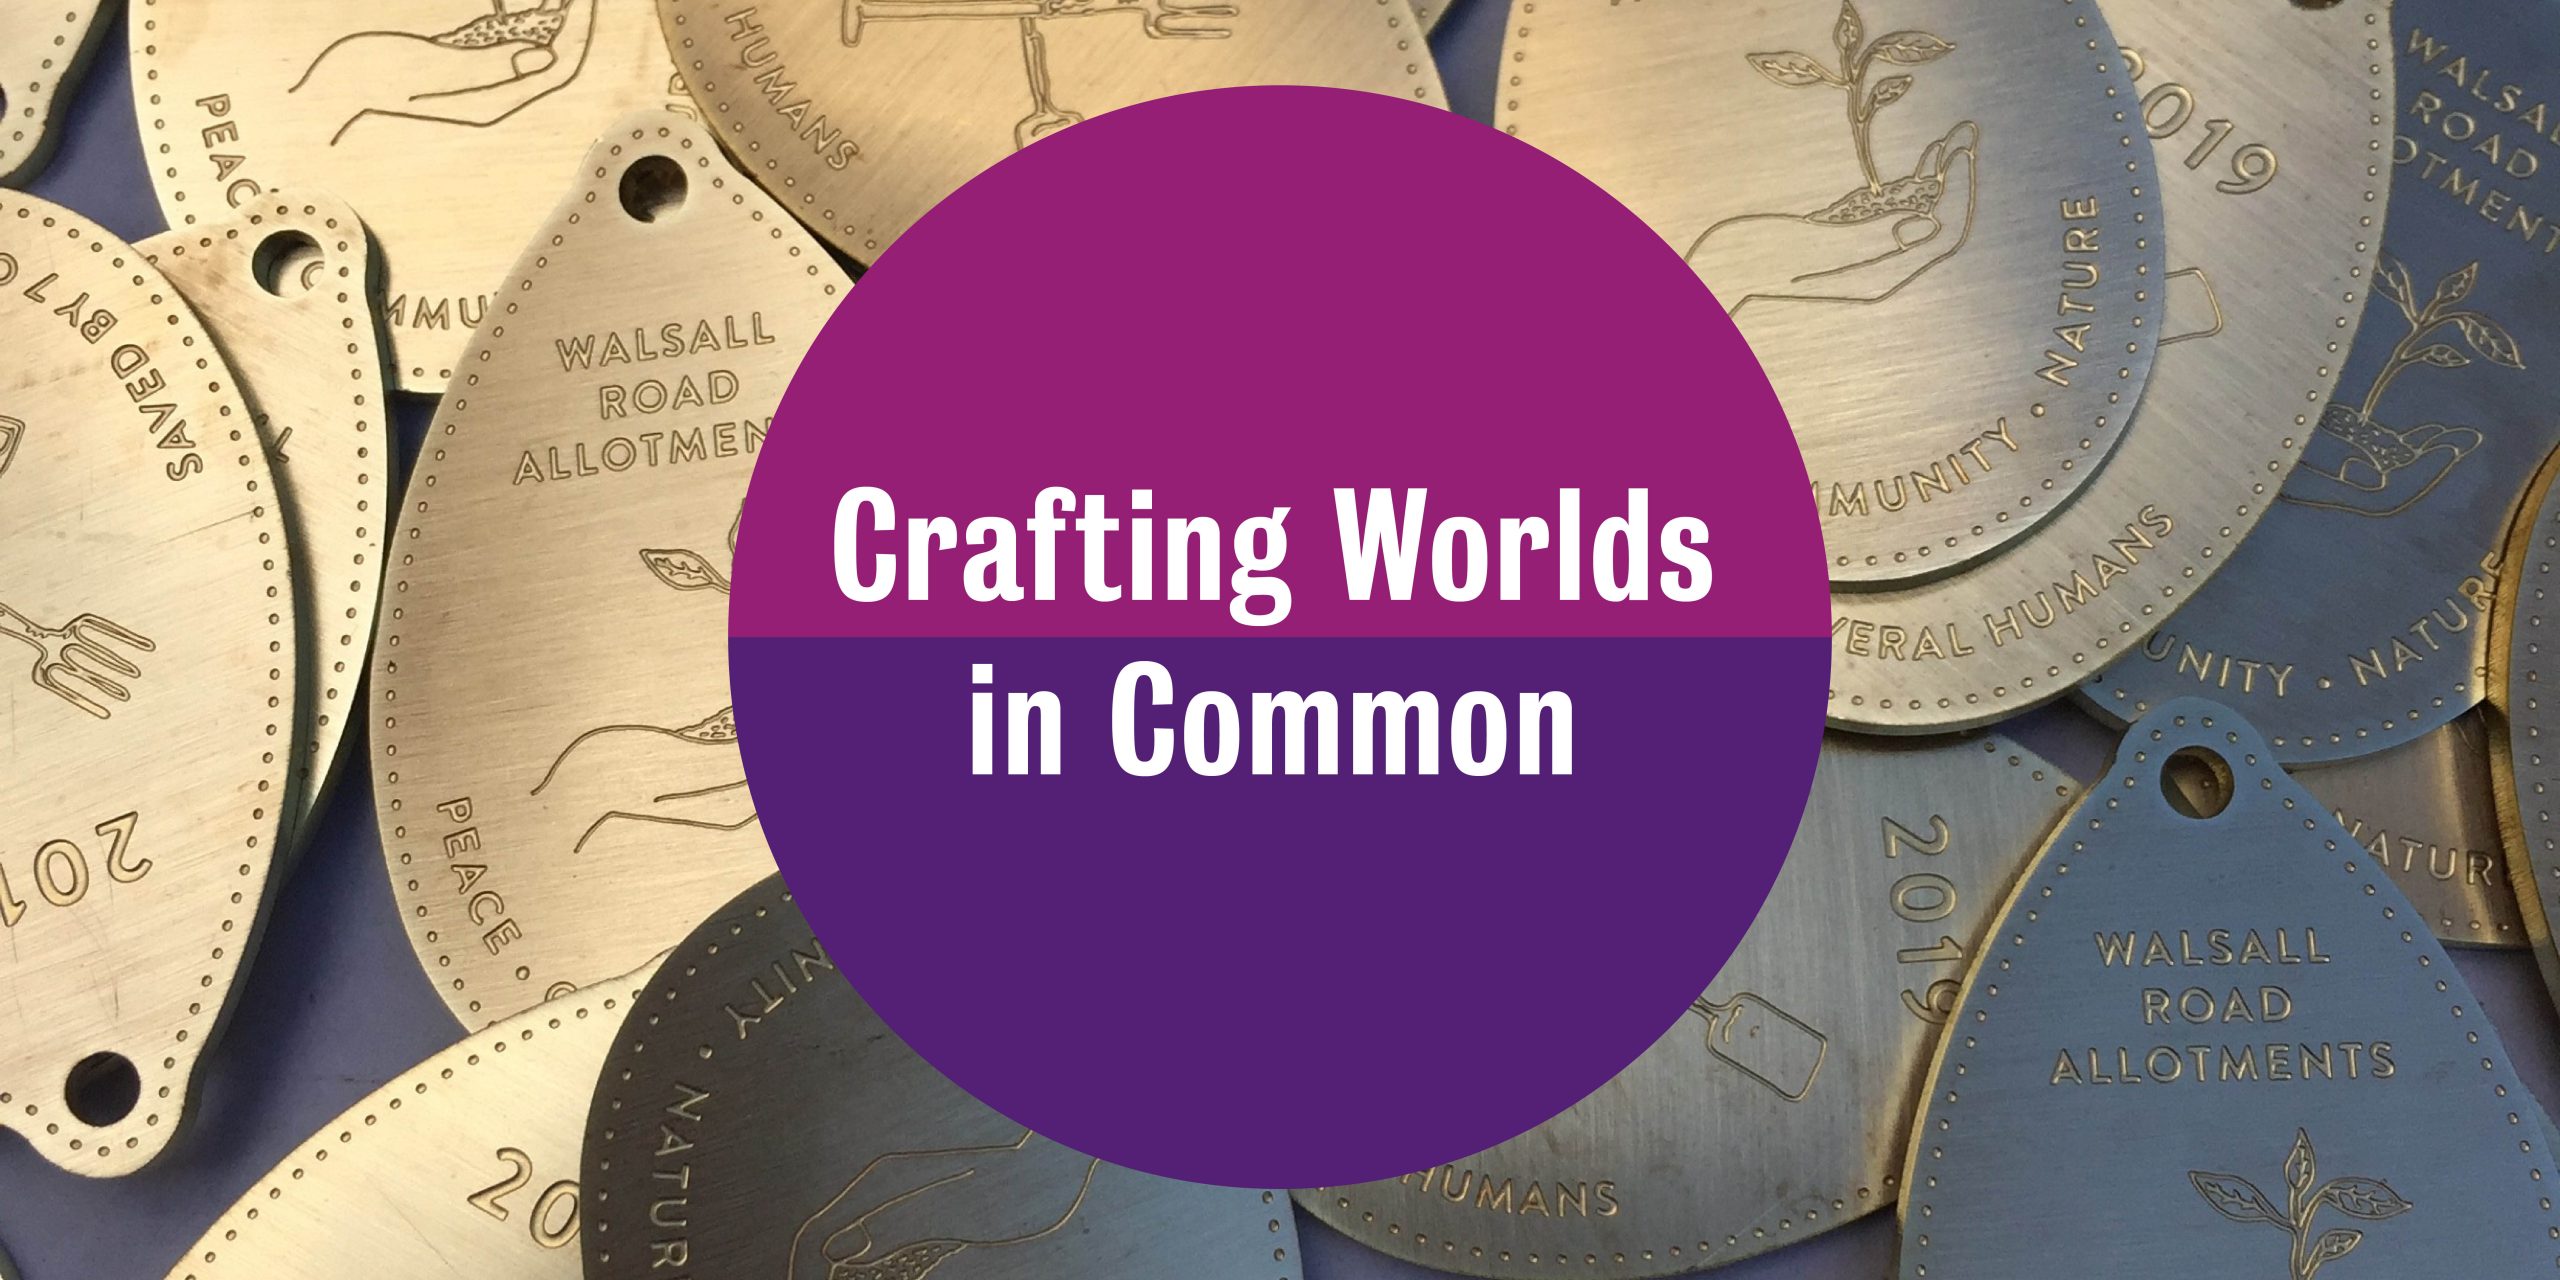 Commoners | Crafting Worlds in Common symposium